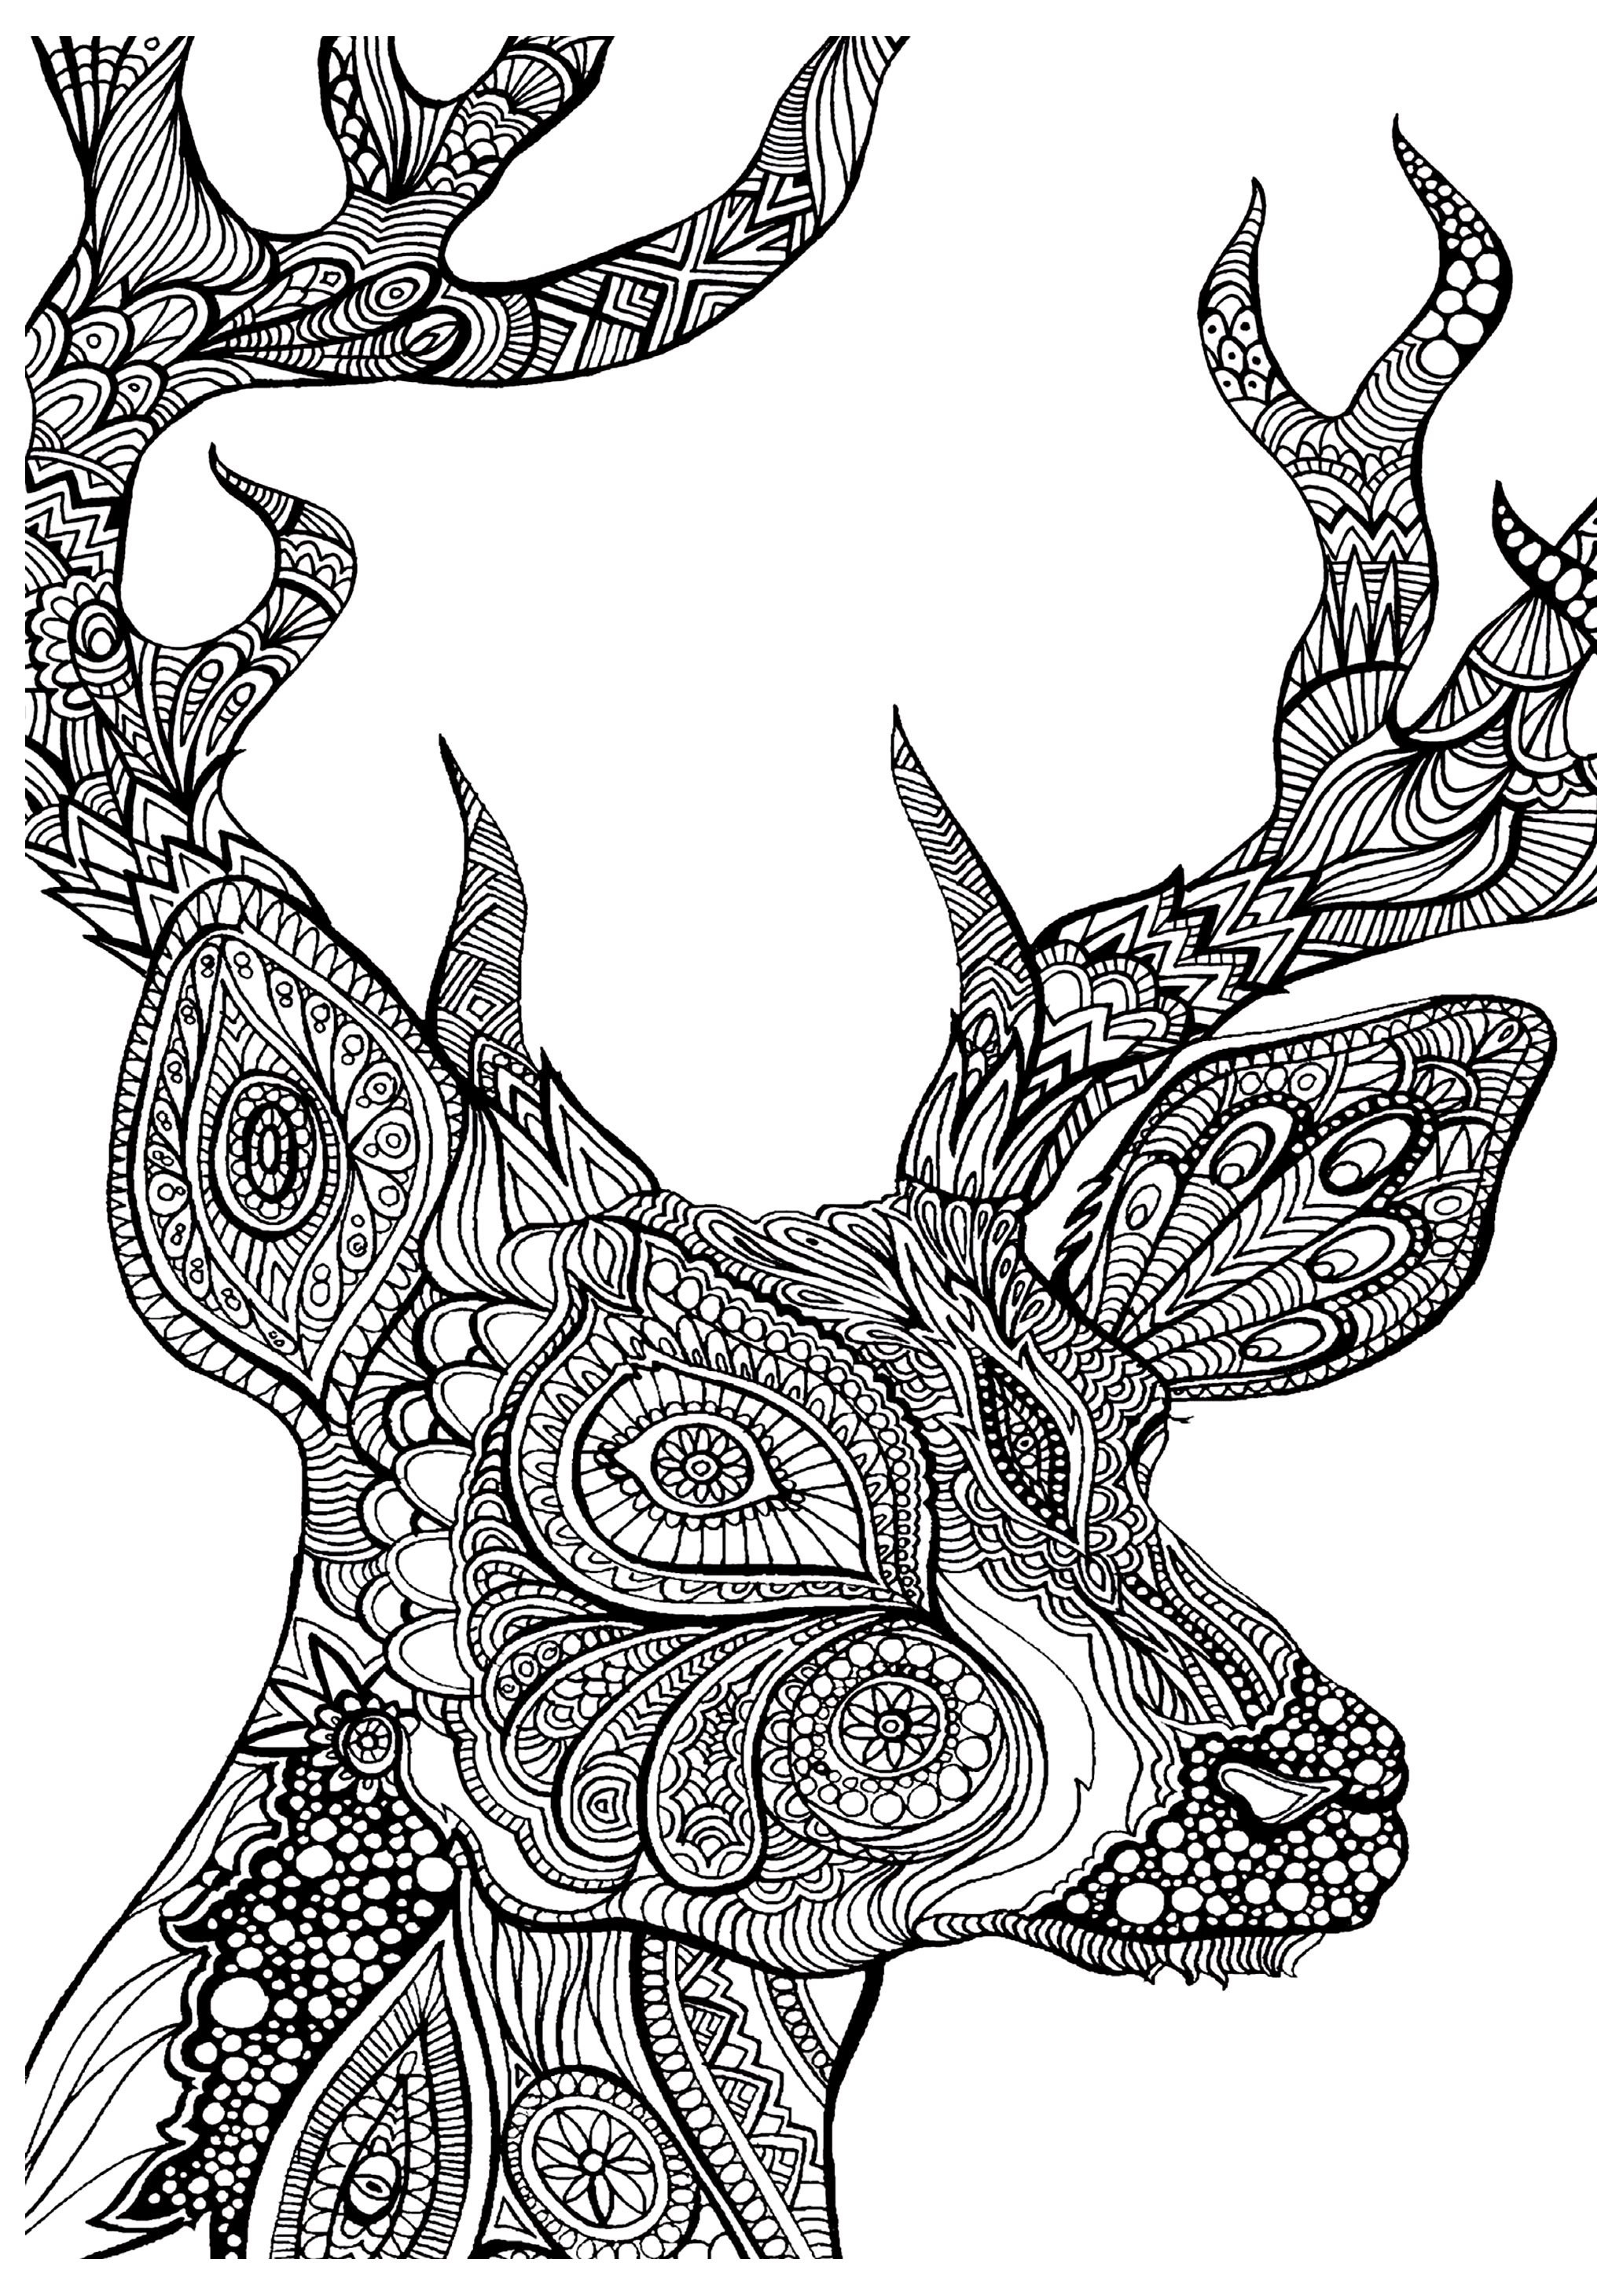 Adult Coloring Sheet
 19 of the Best Adult Colouring Pages Free Printables for